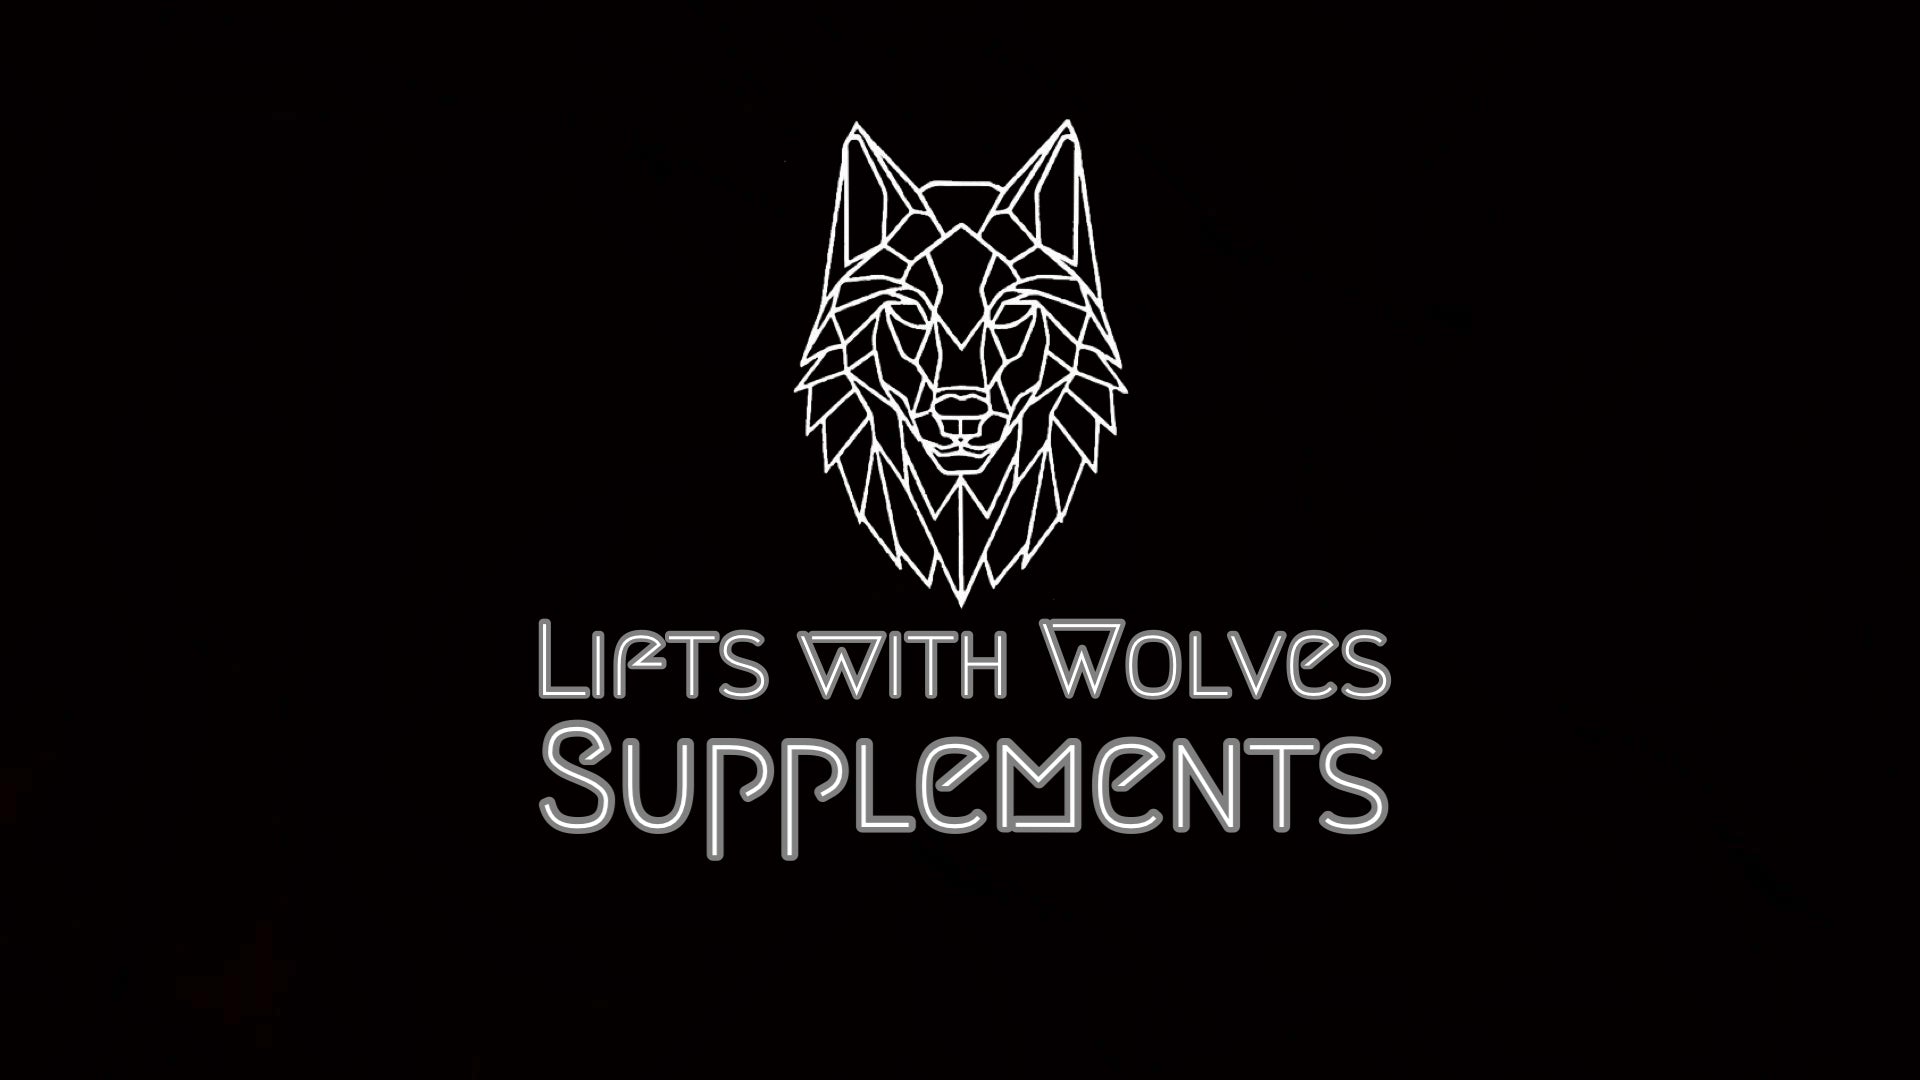 Lifts with Wolves Supplements